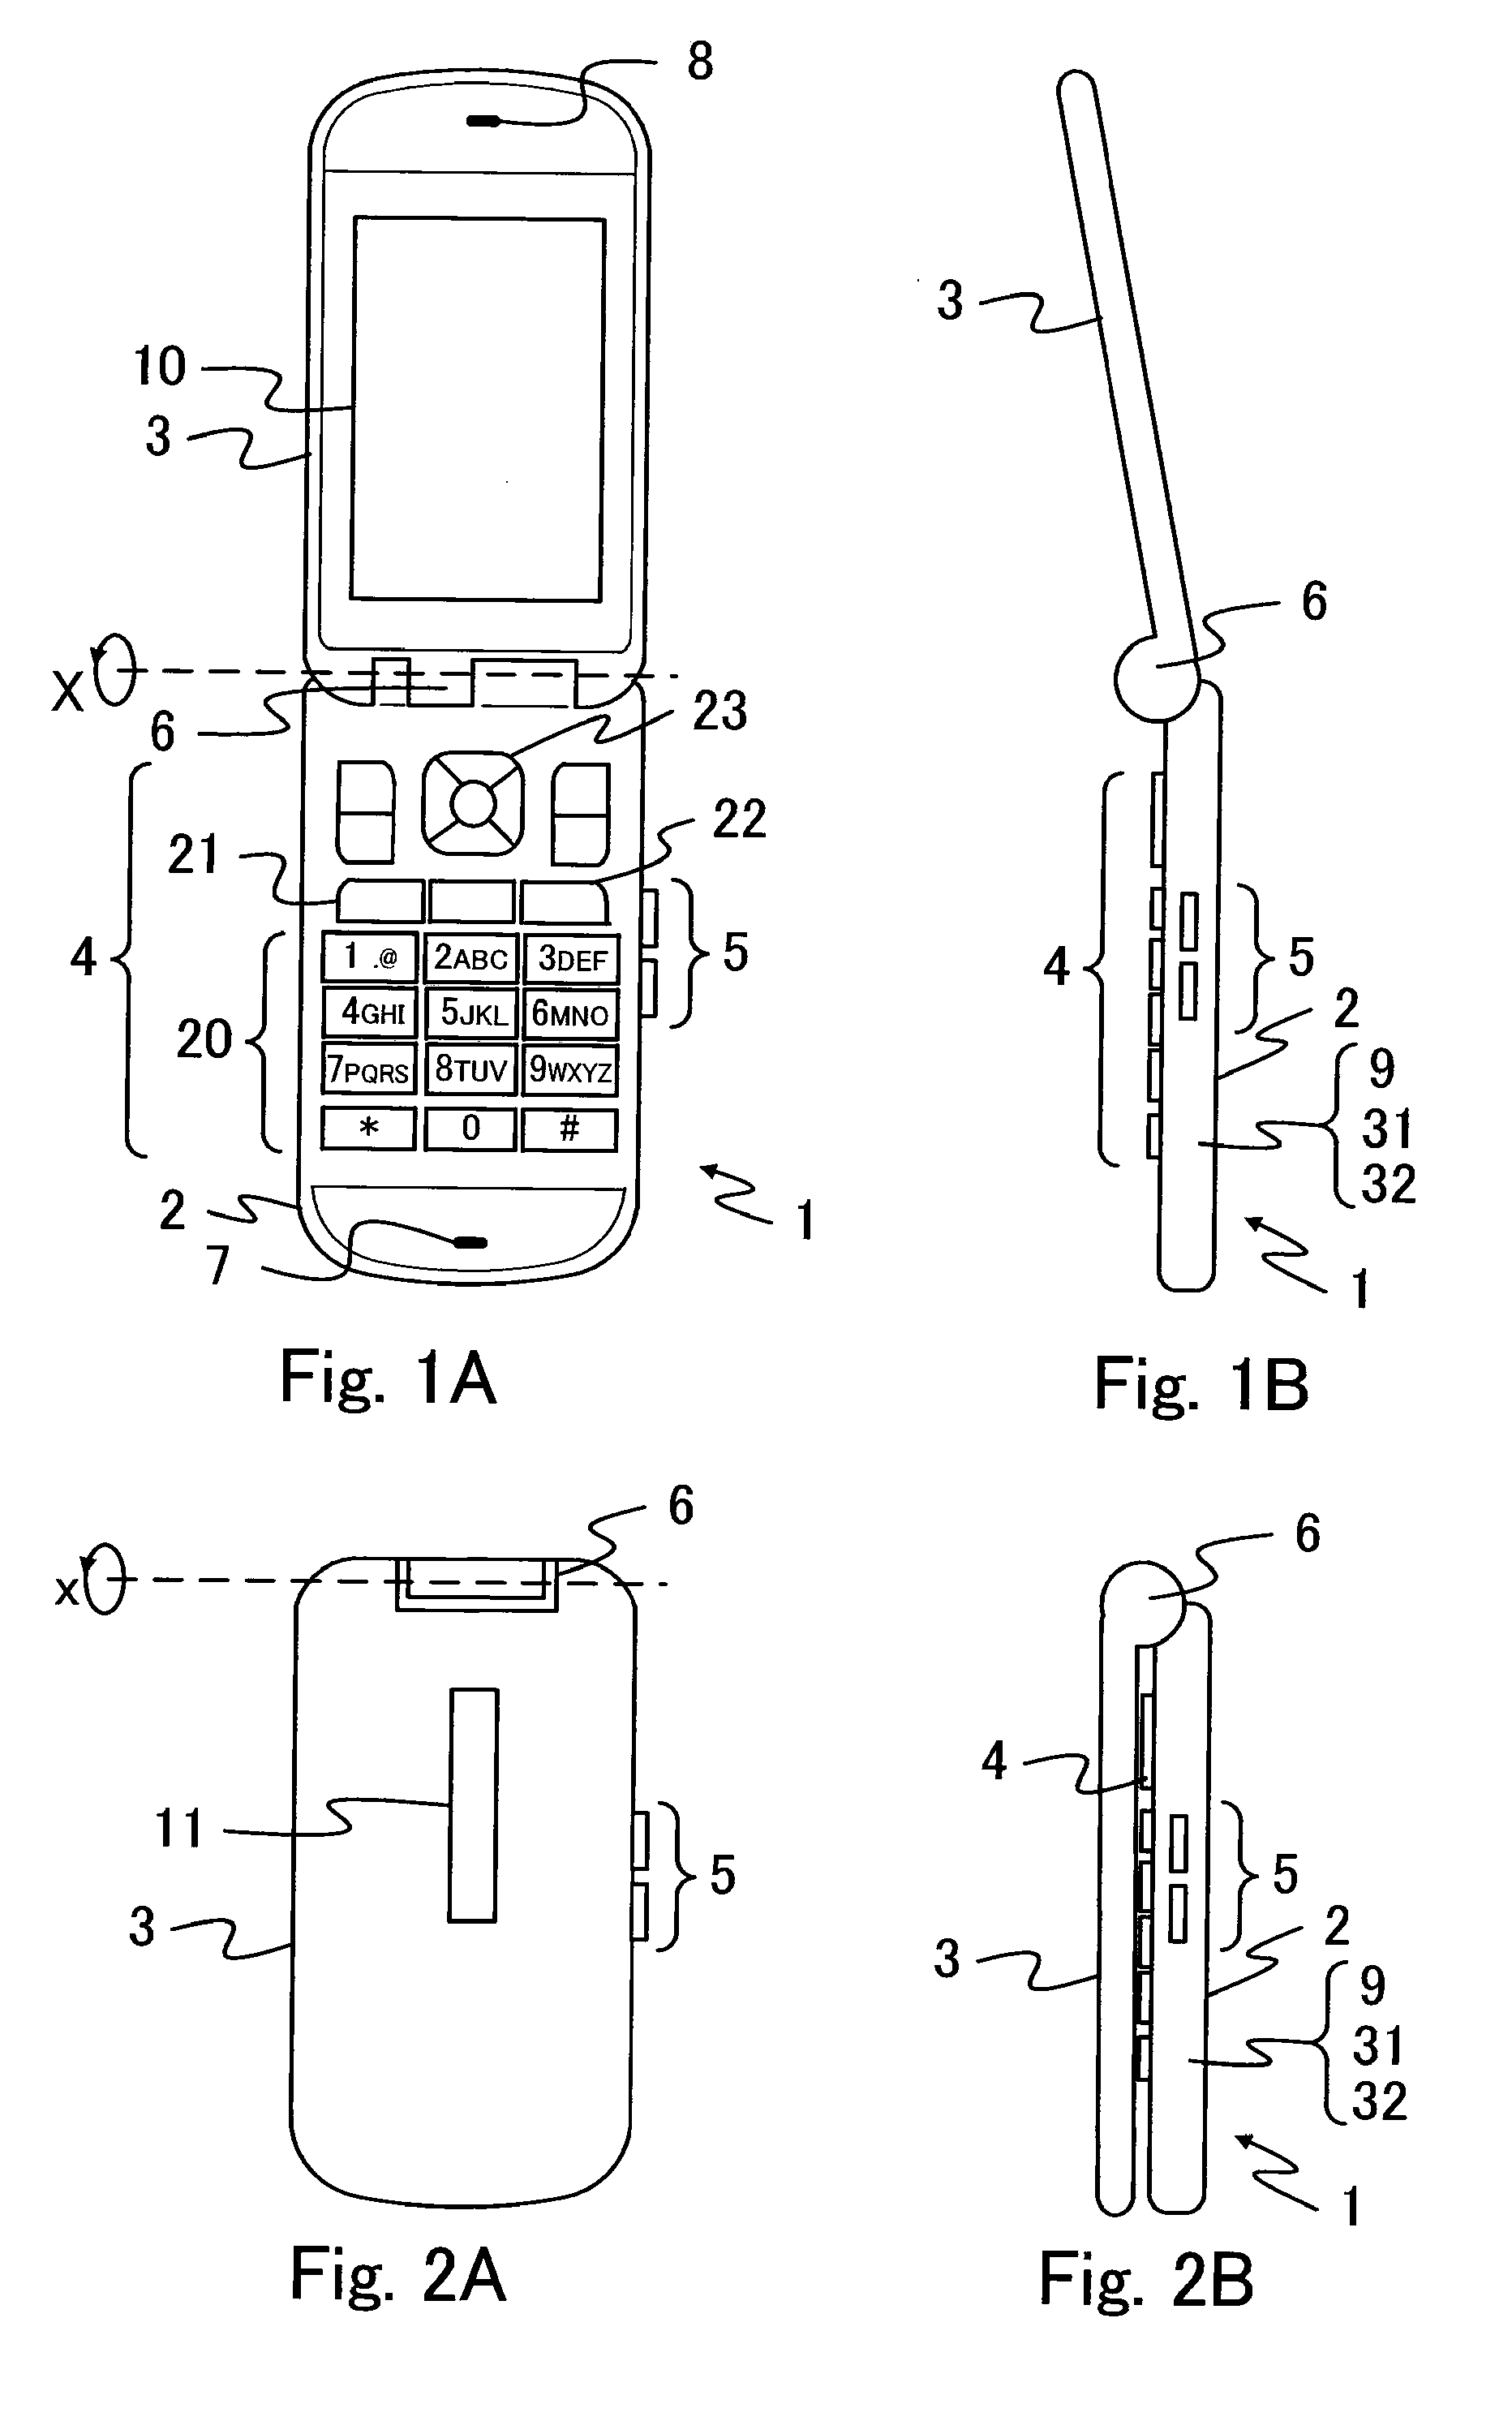 Electronic device and program for entering character